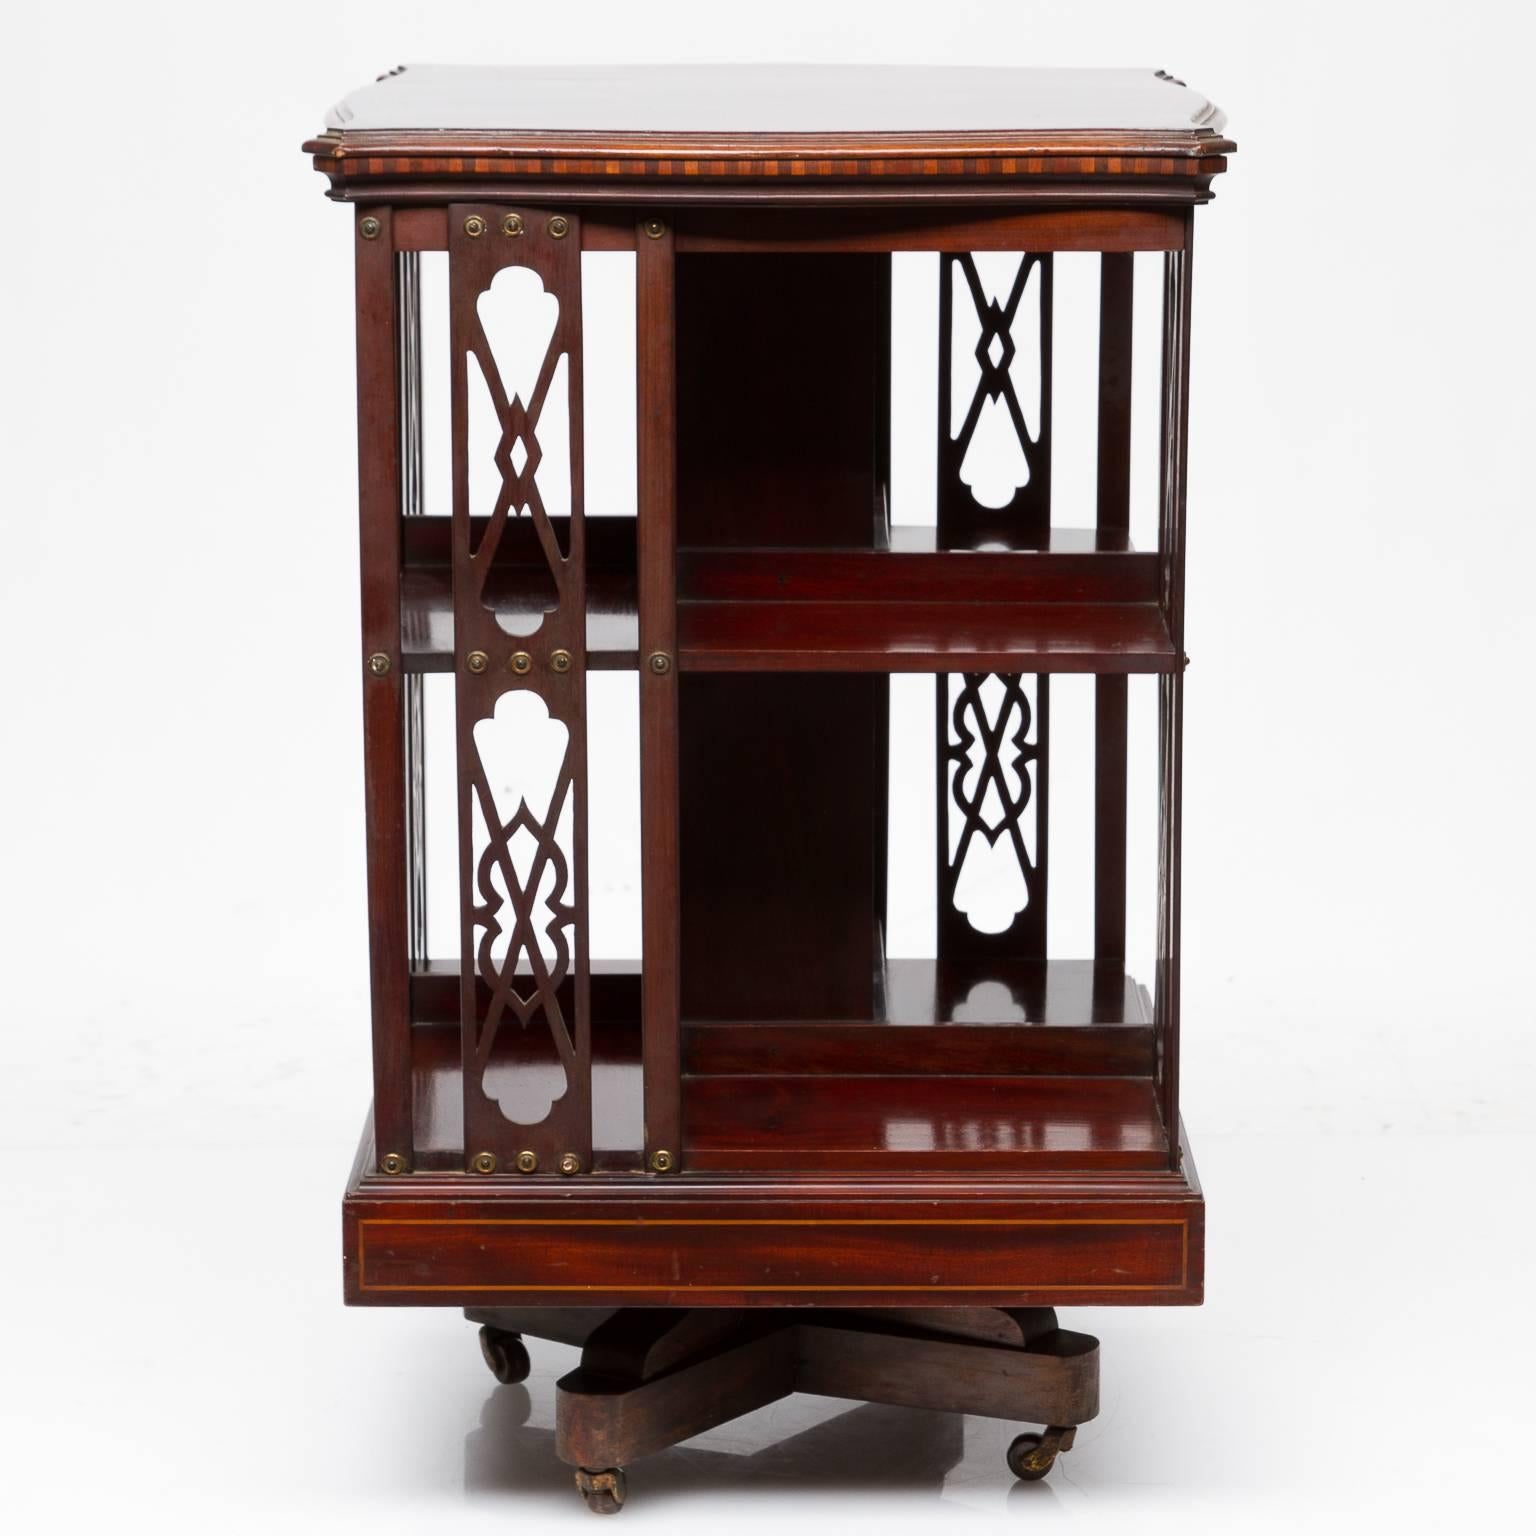 A fine inlaid mahogany revolving bookstand. Inlaid top, and trim around the top, pierced work on sides and finished shelves. This rest upon a sturdy base which revolves and castors for mobility. Very nice quality piece. Signed 